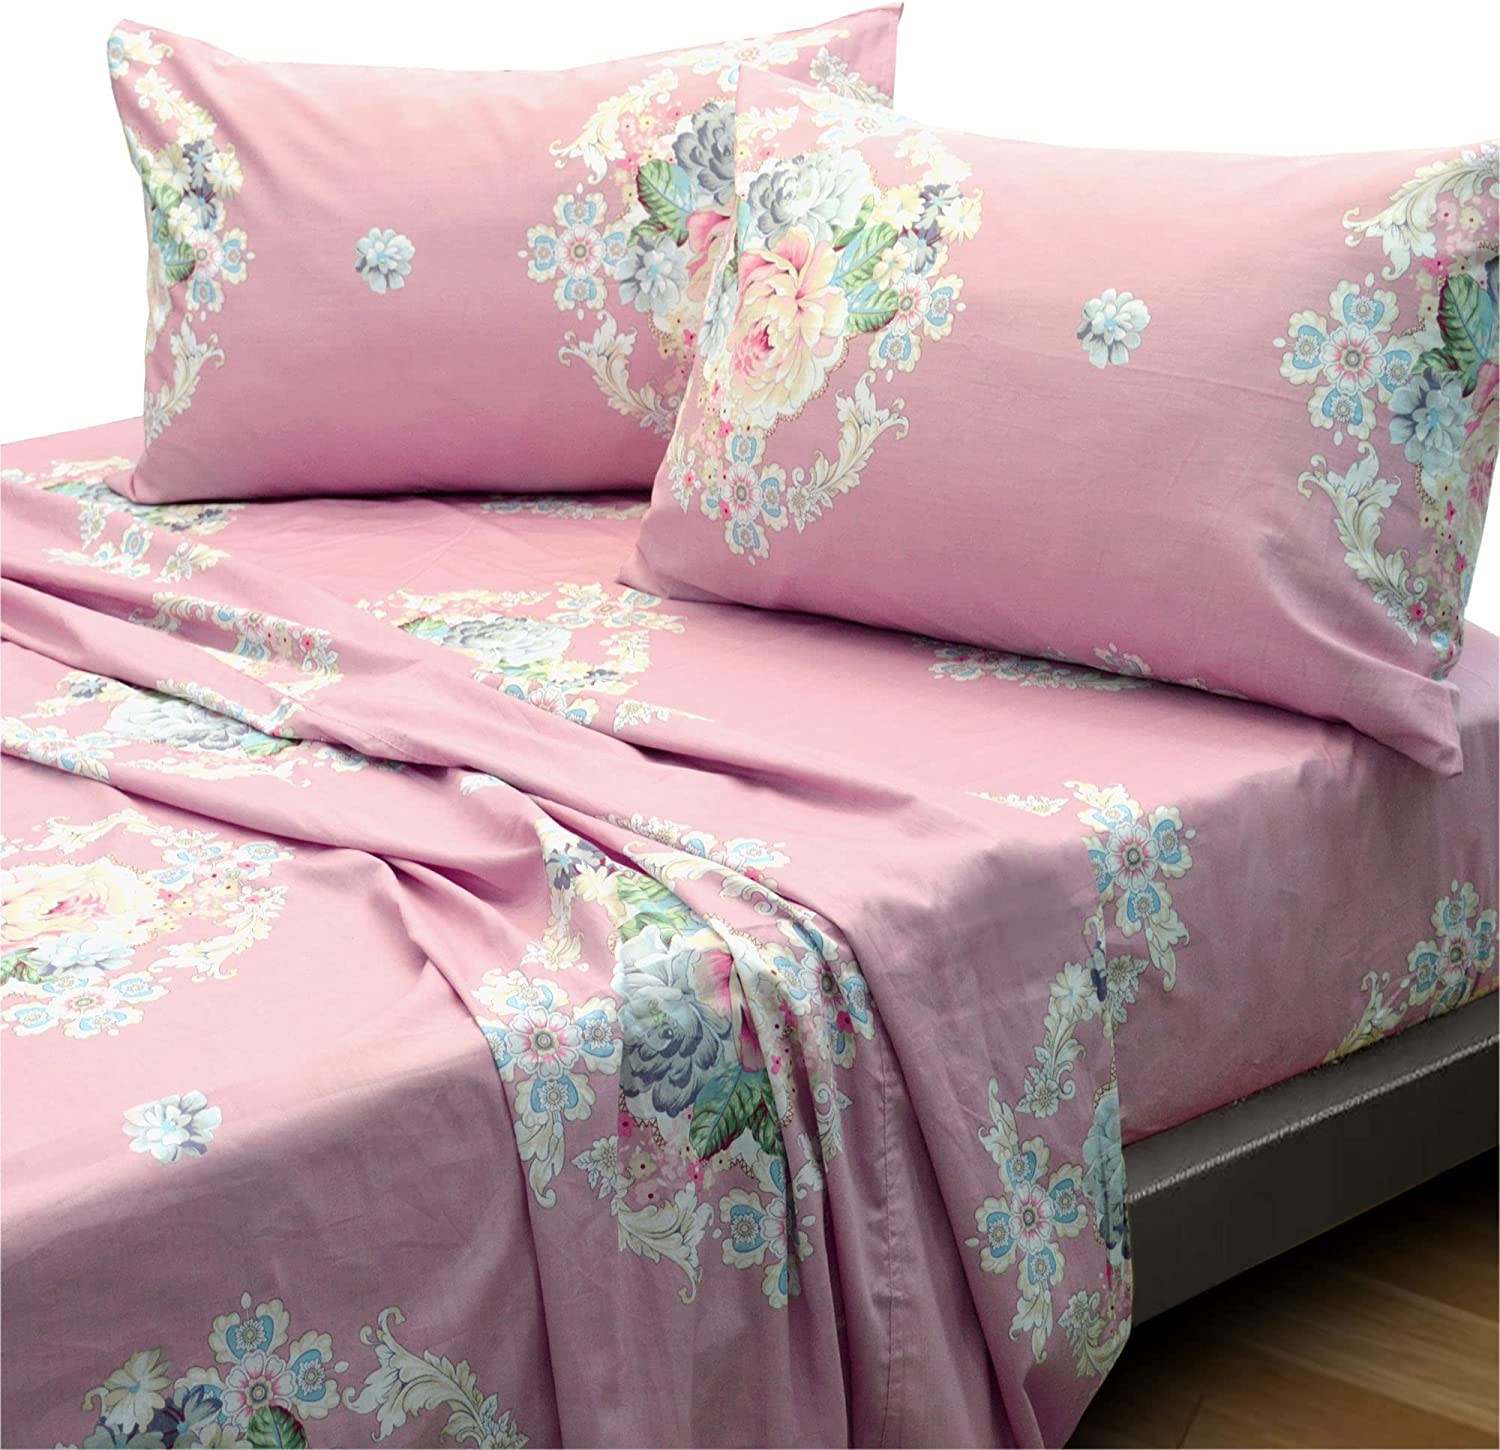 Double Bed Sheet Set 4pc Pictorial Collection,